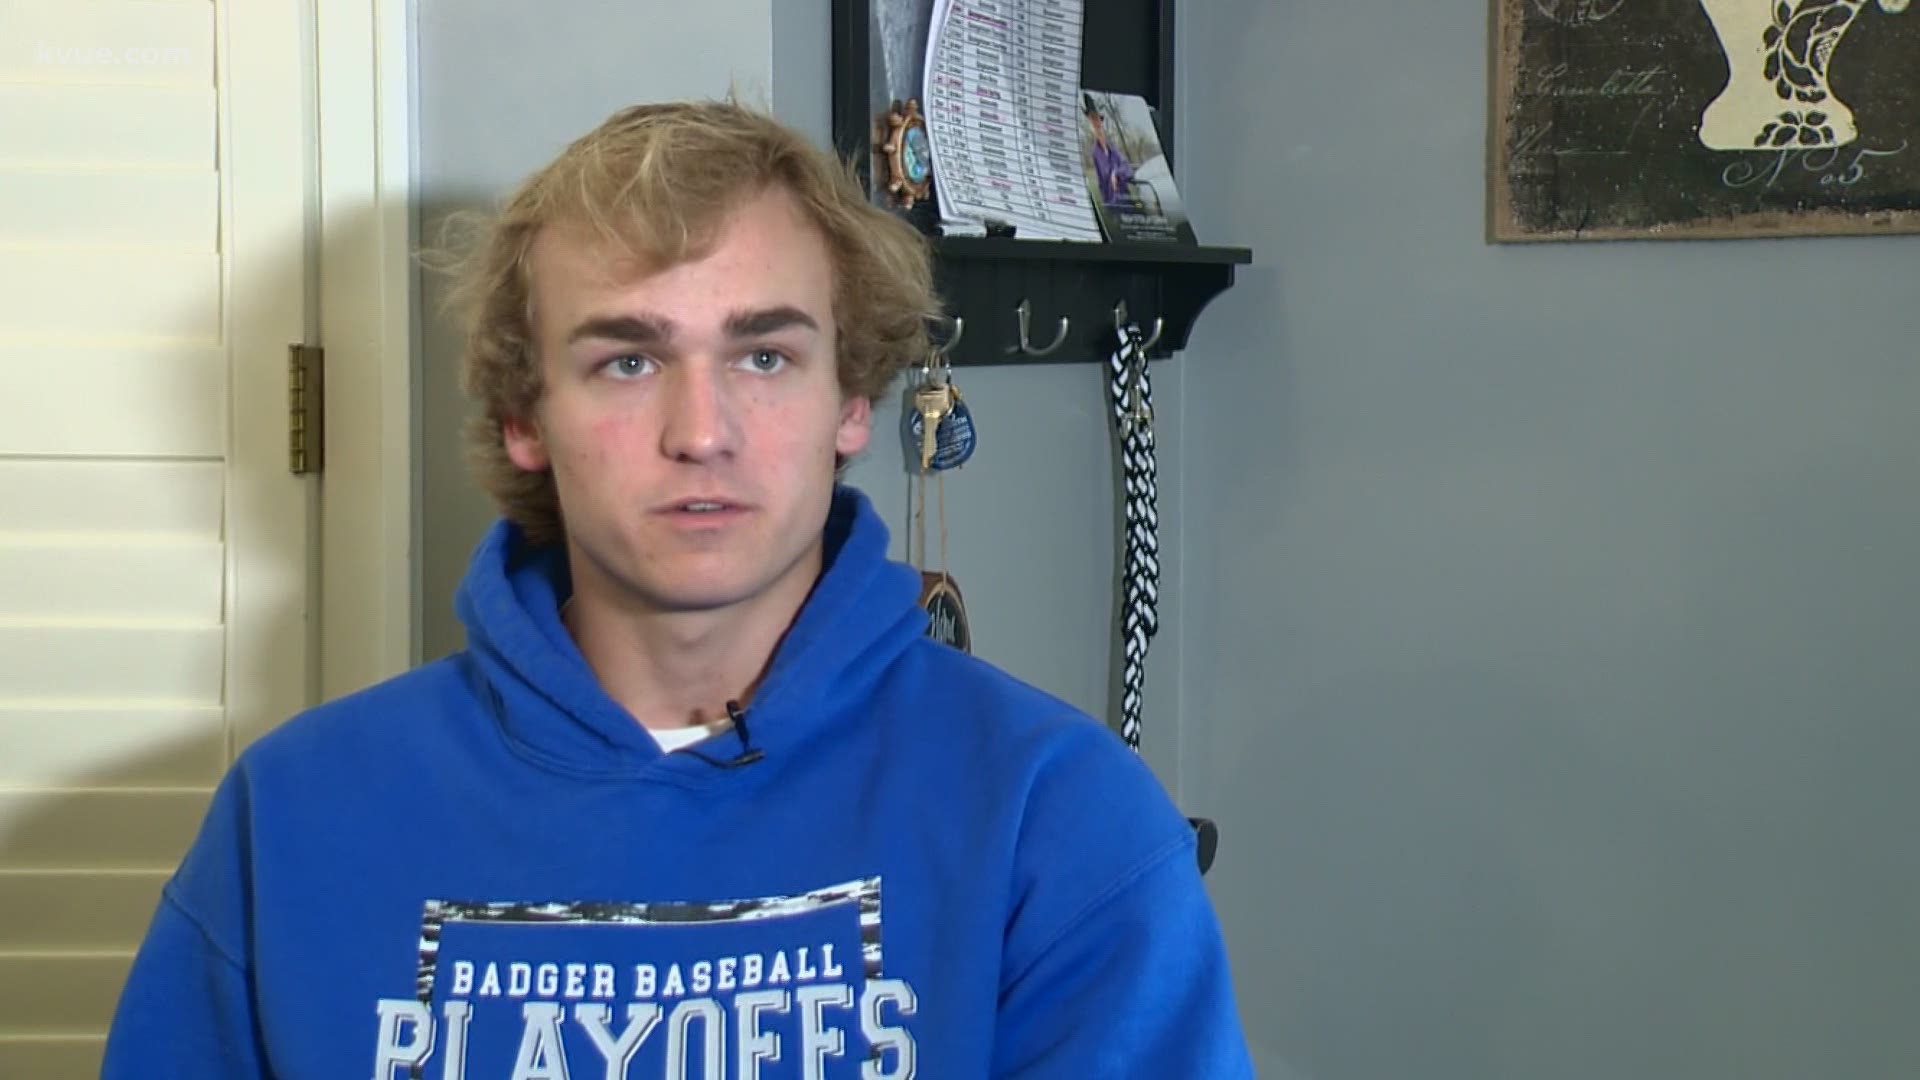 Lampasas senior Ace Whitehead has a fire burning inside him. He almost quit baseball after his cousin's passing, but now he's proving a loved one right.